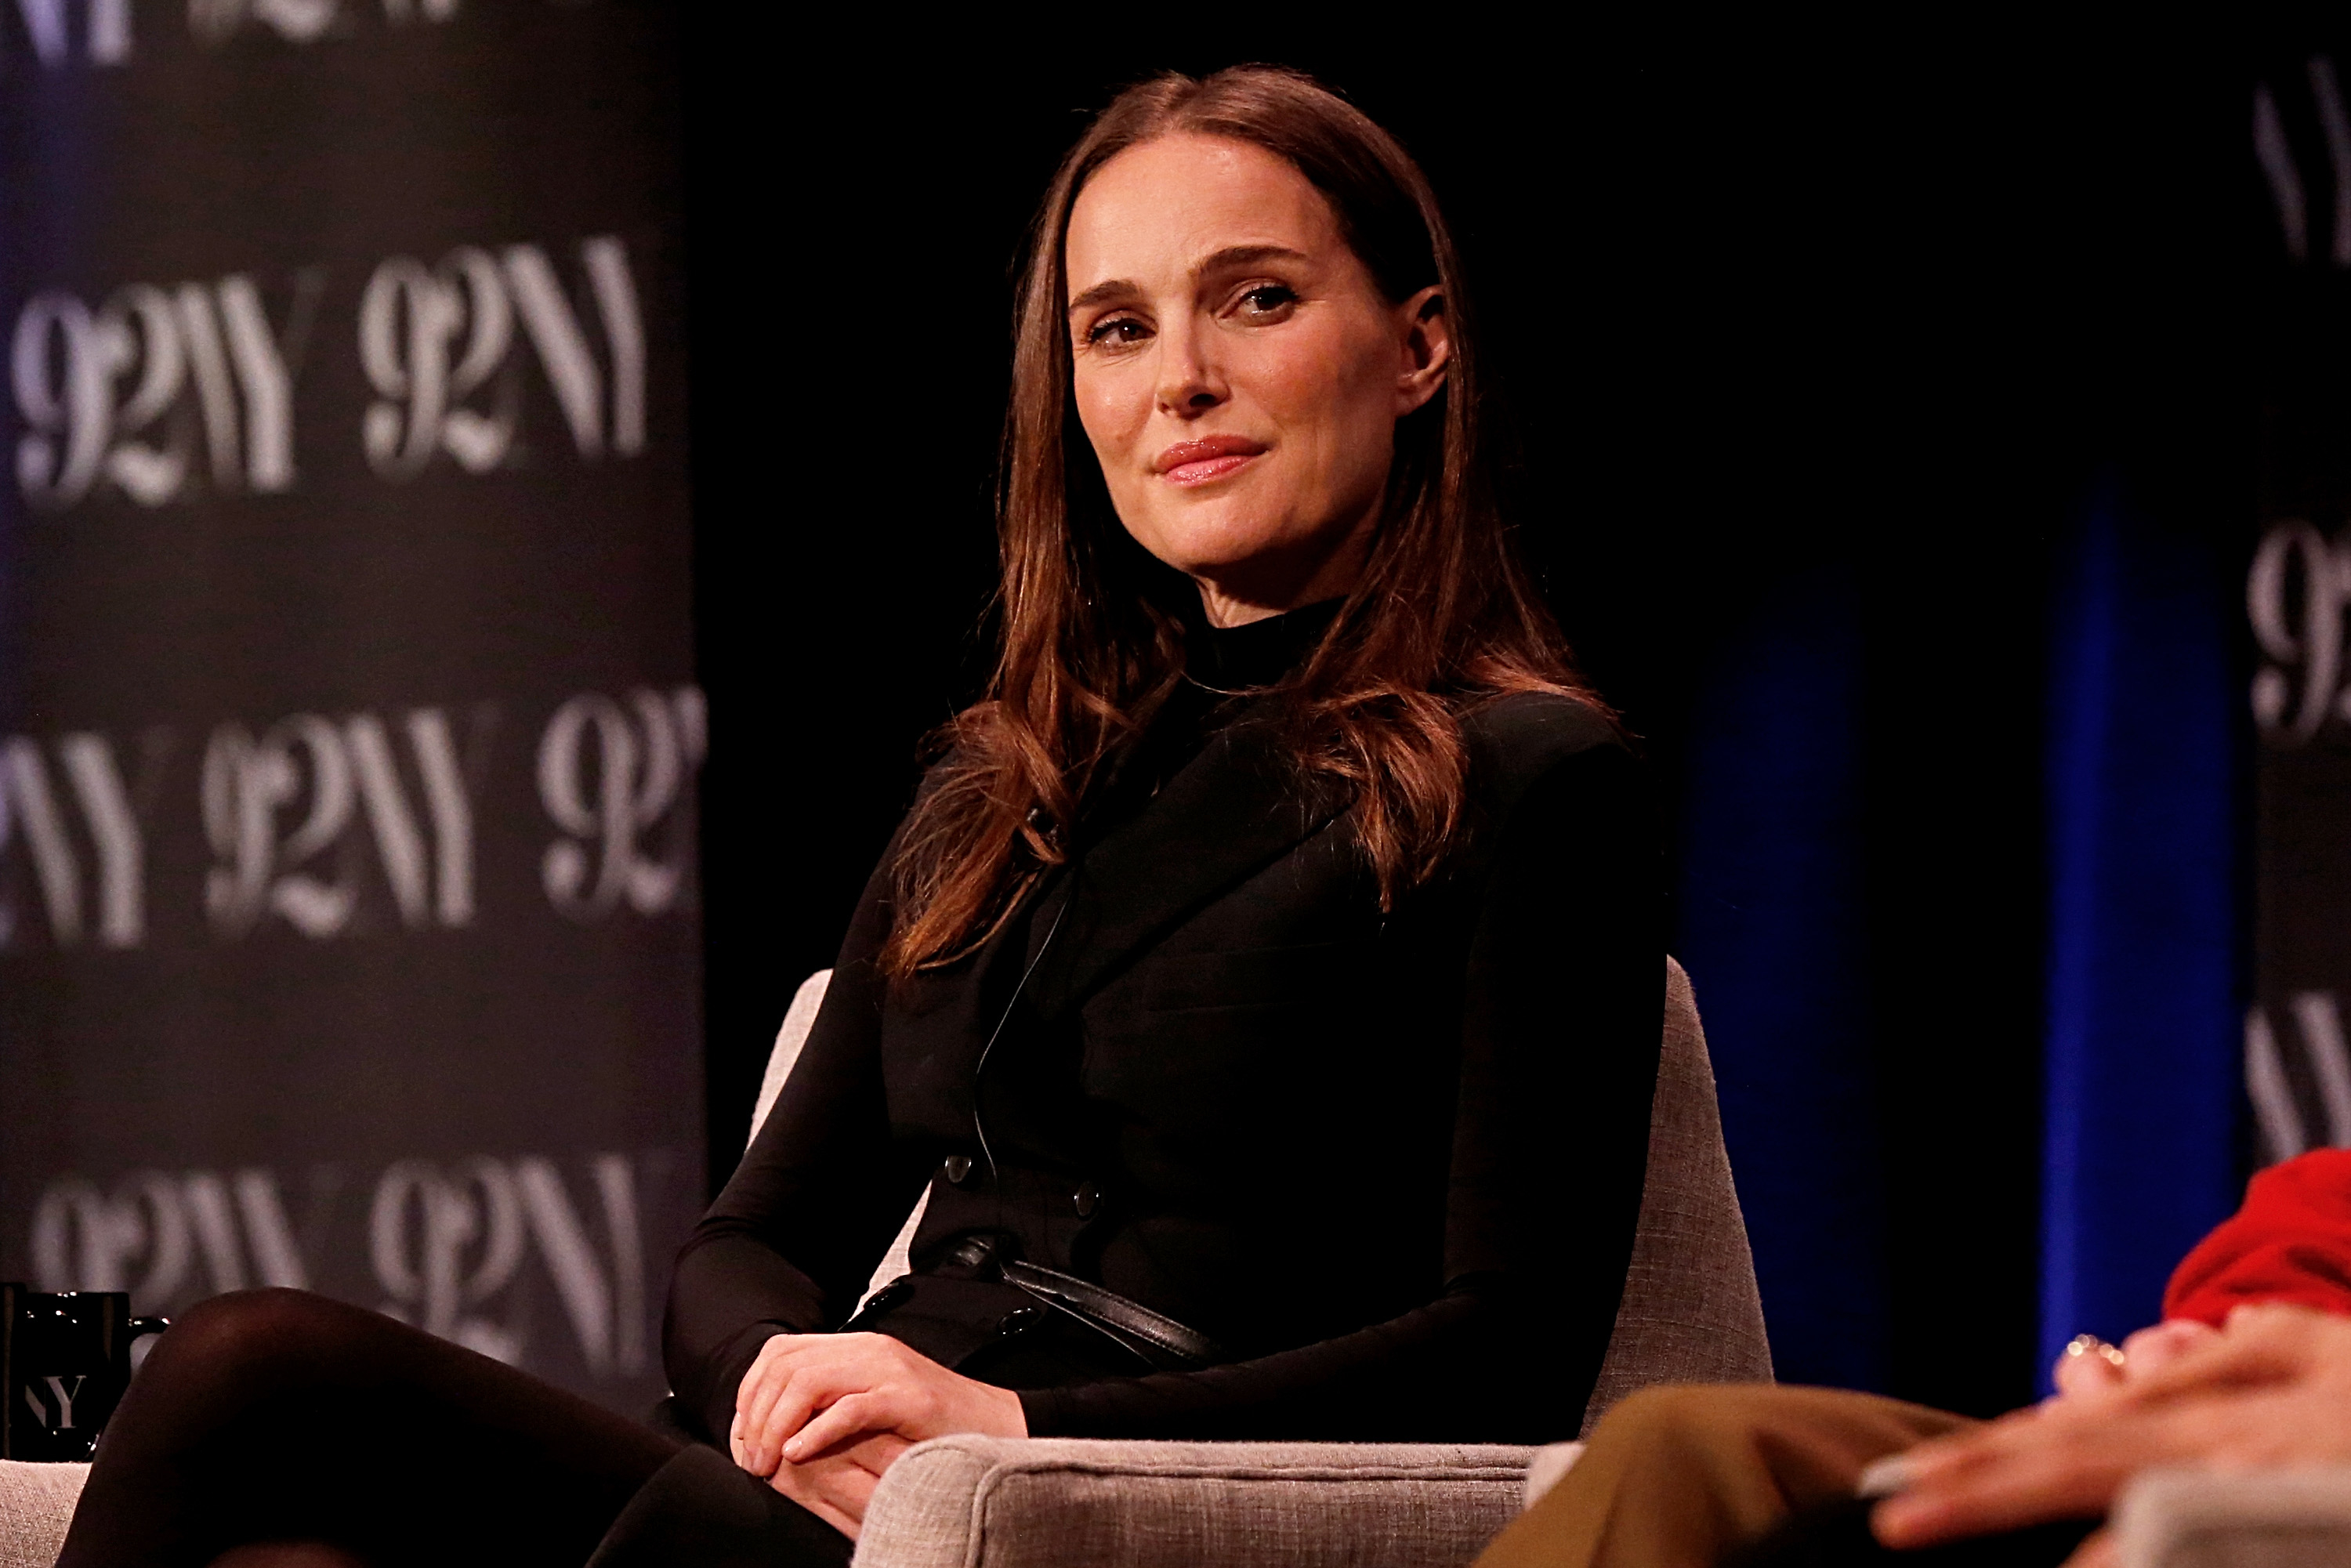 Natalie sitting onstage as part of a discussion